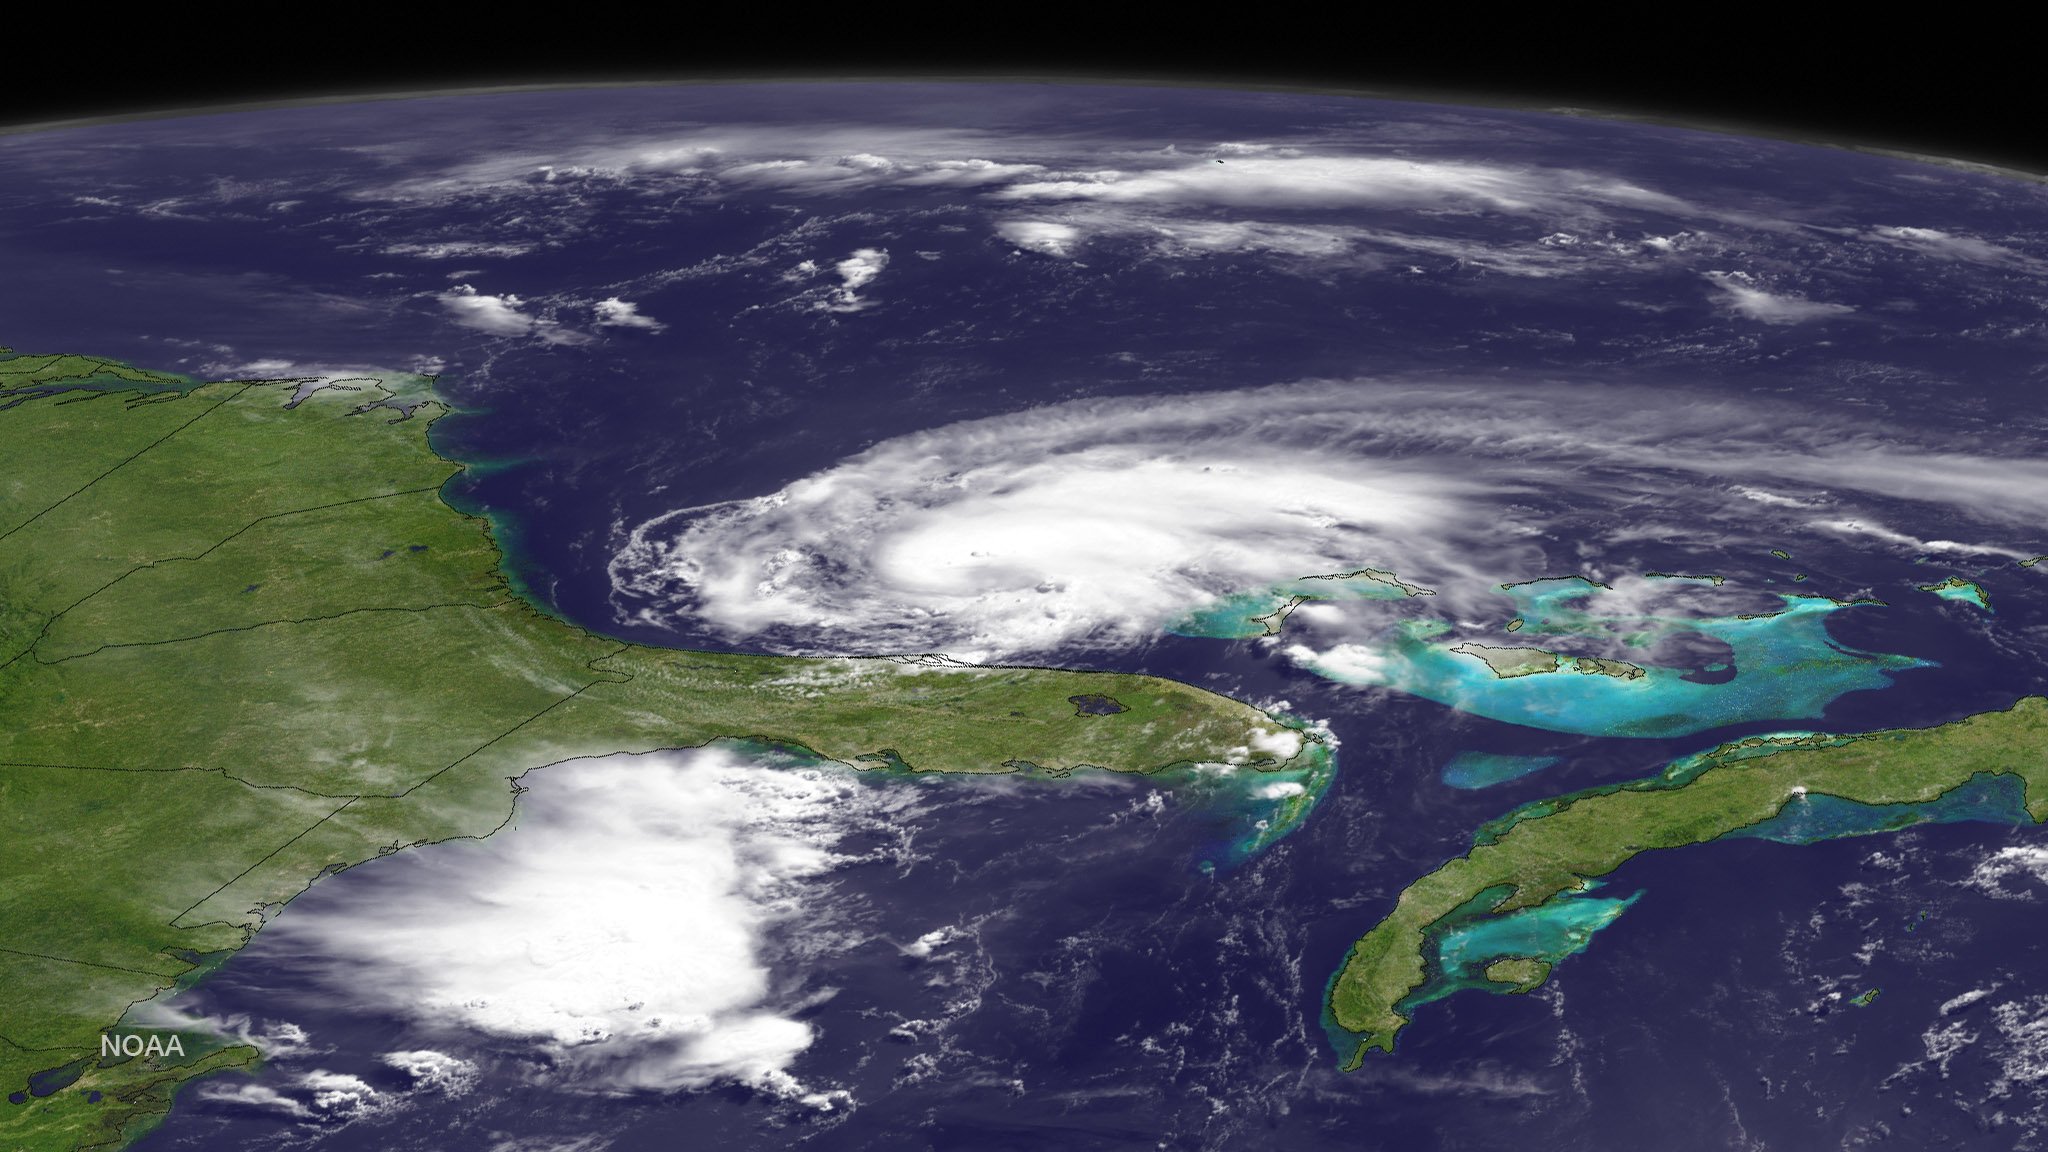 Weather system Arthur travels up the east coast of the United States in the Atlantic Ocean pictured on July 2, 2014.